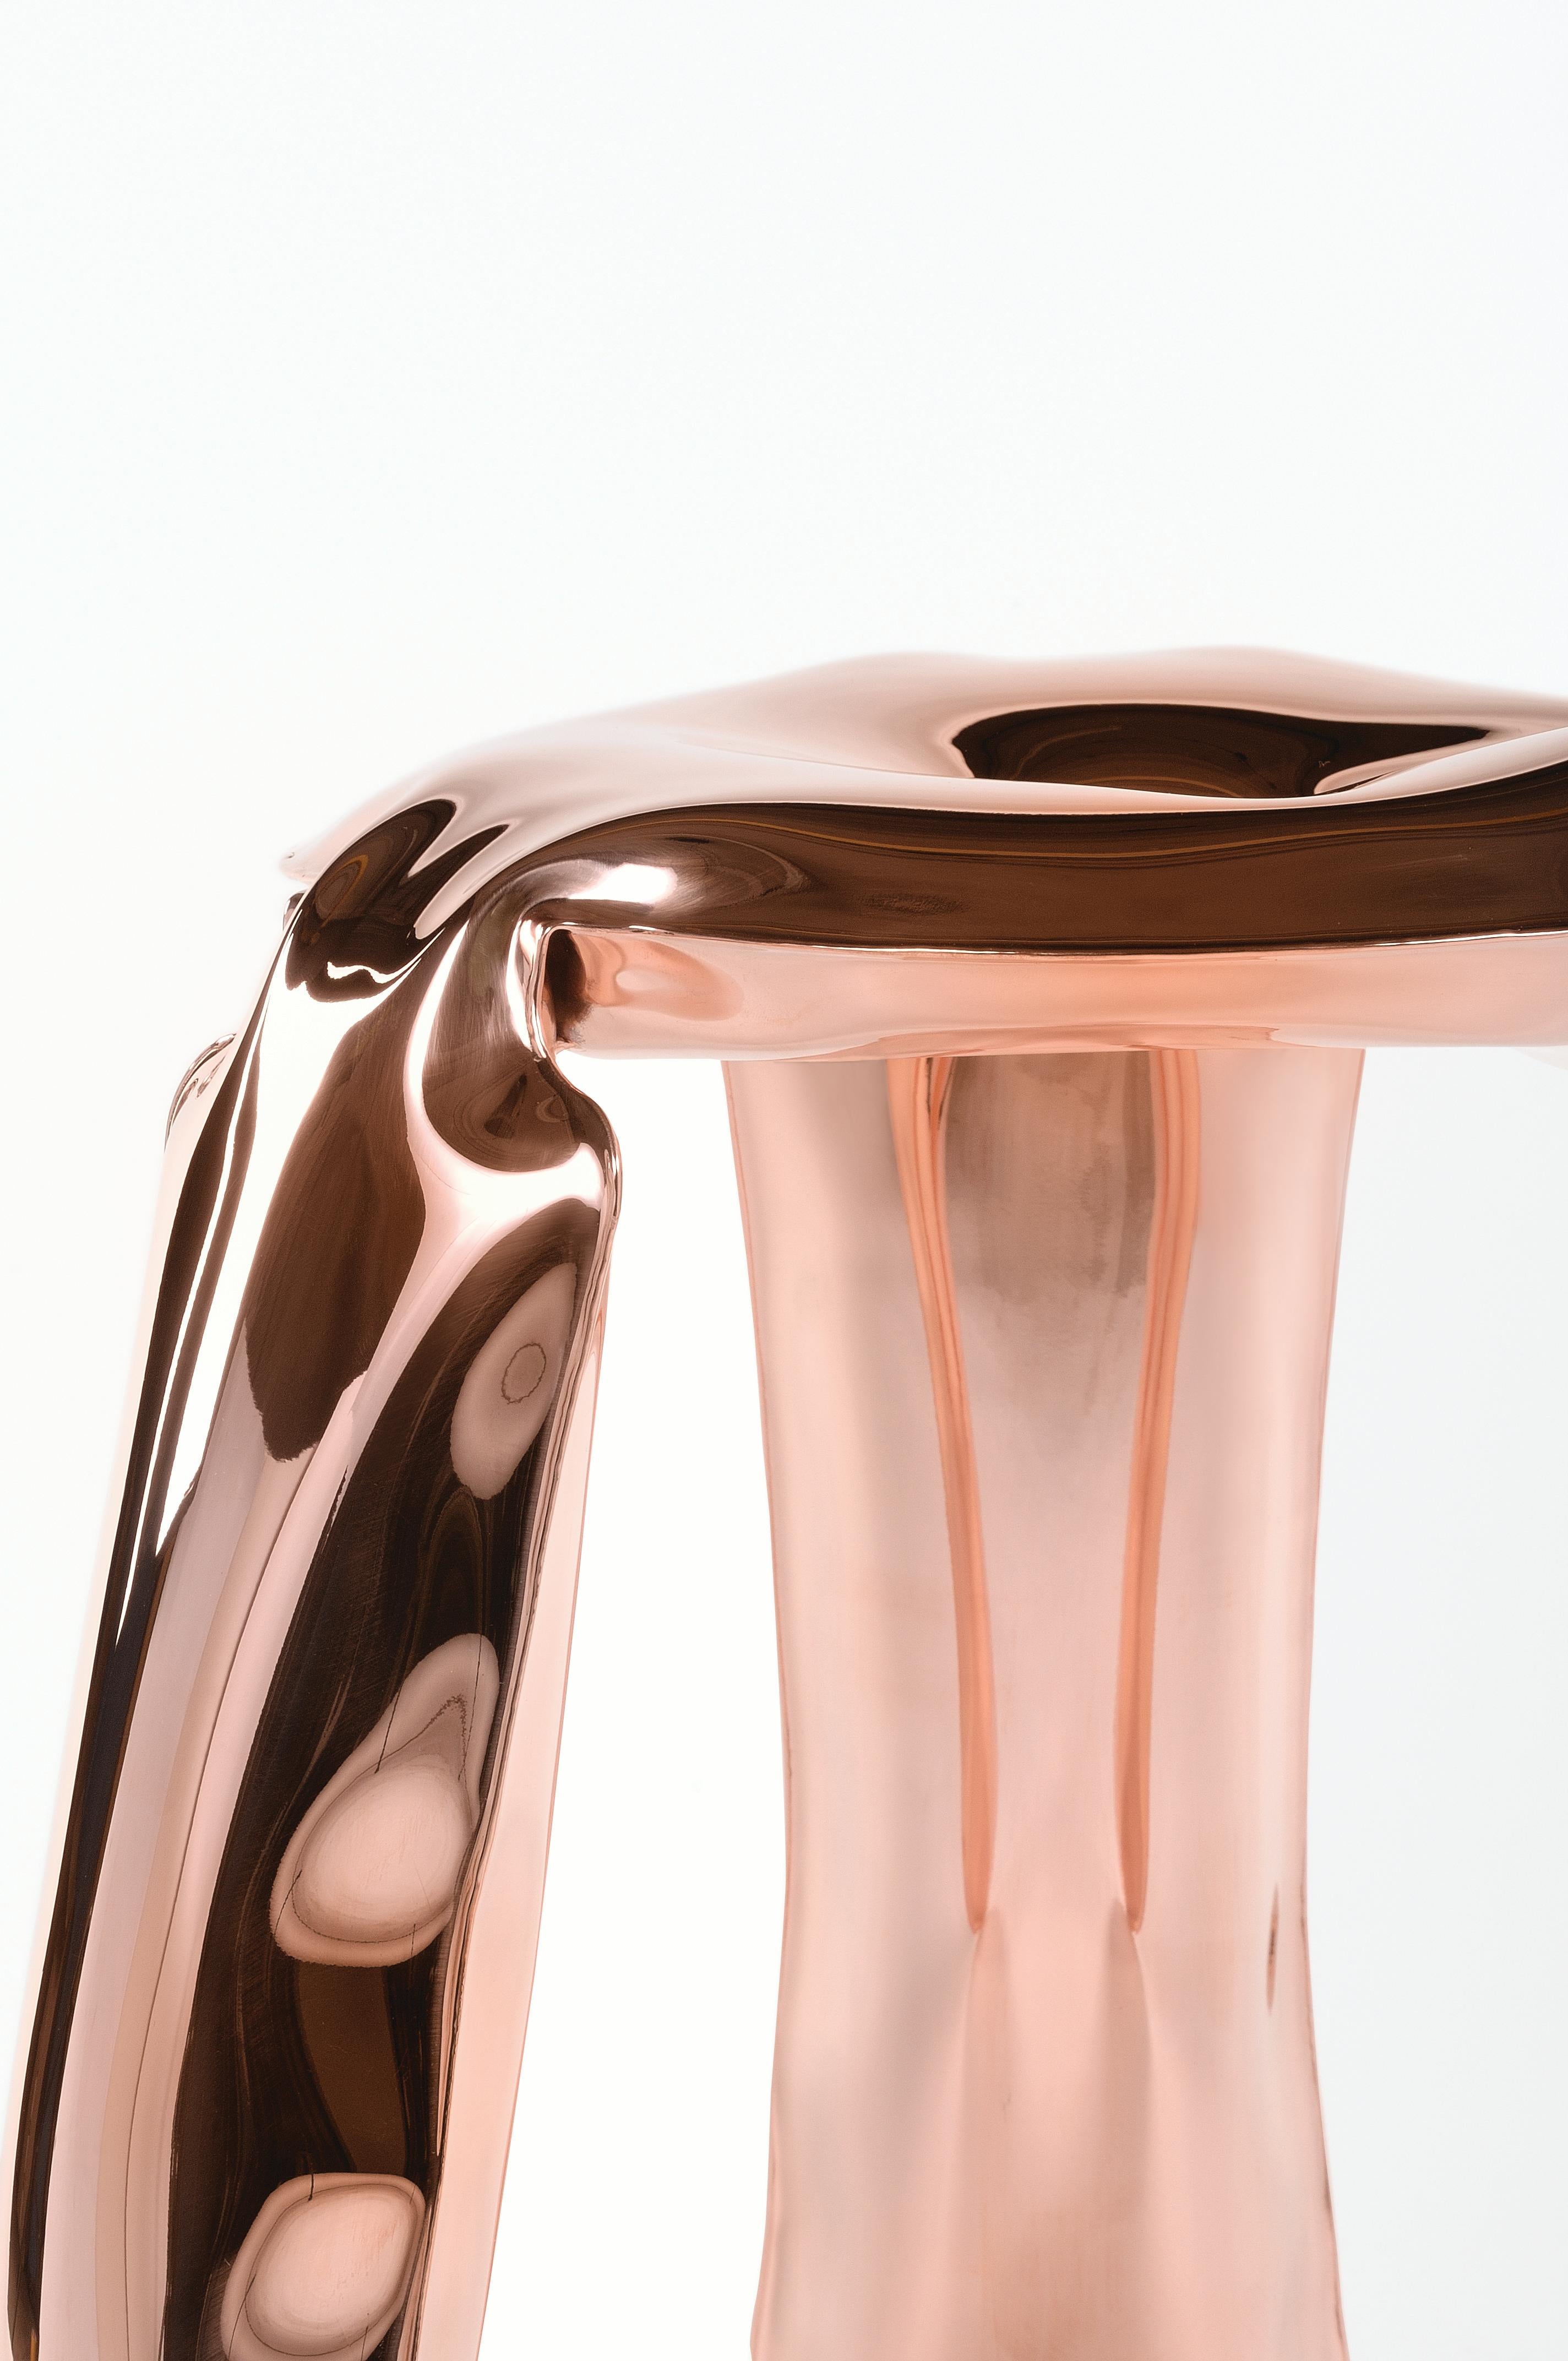 Modern Limited Edition Plopp Mini Stool in Polished Copper by Zieta For Sale